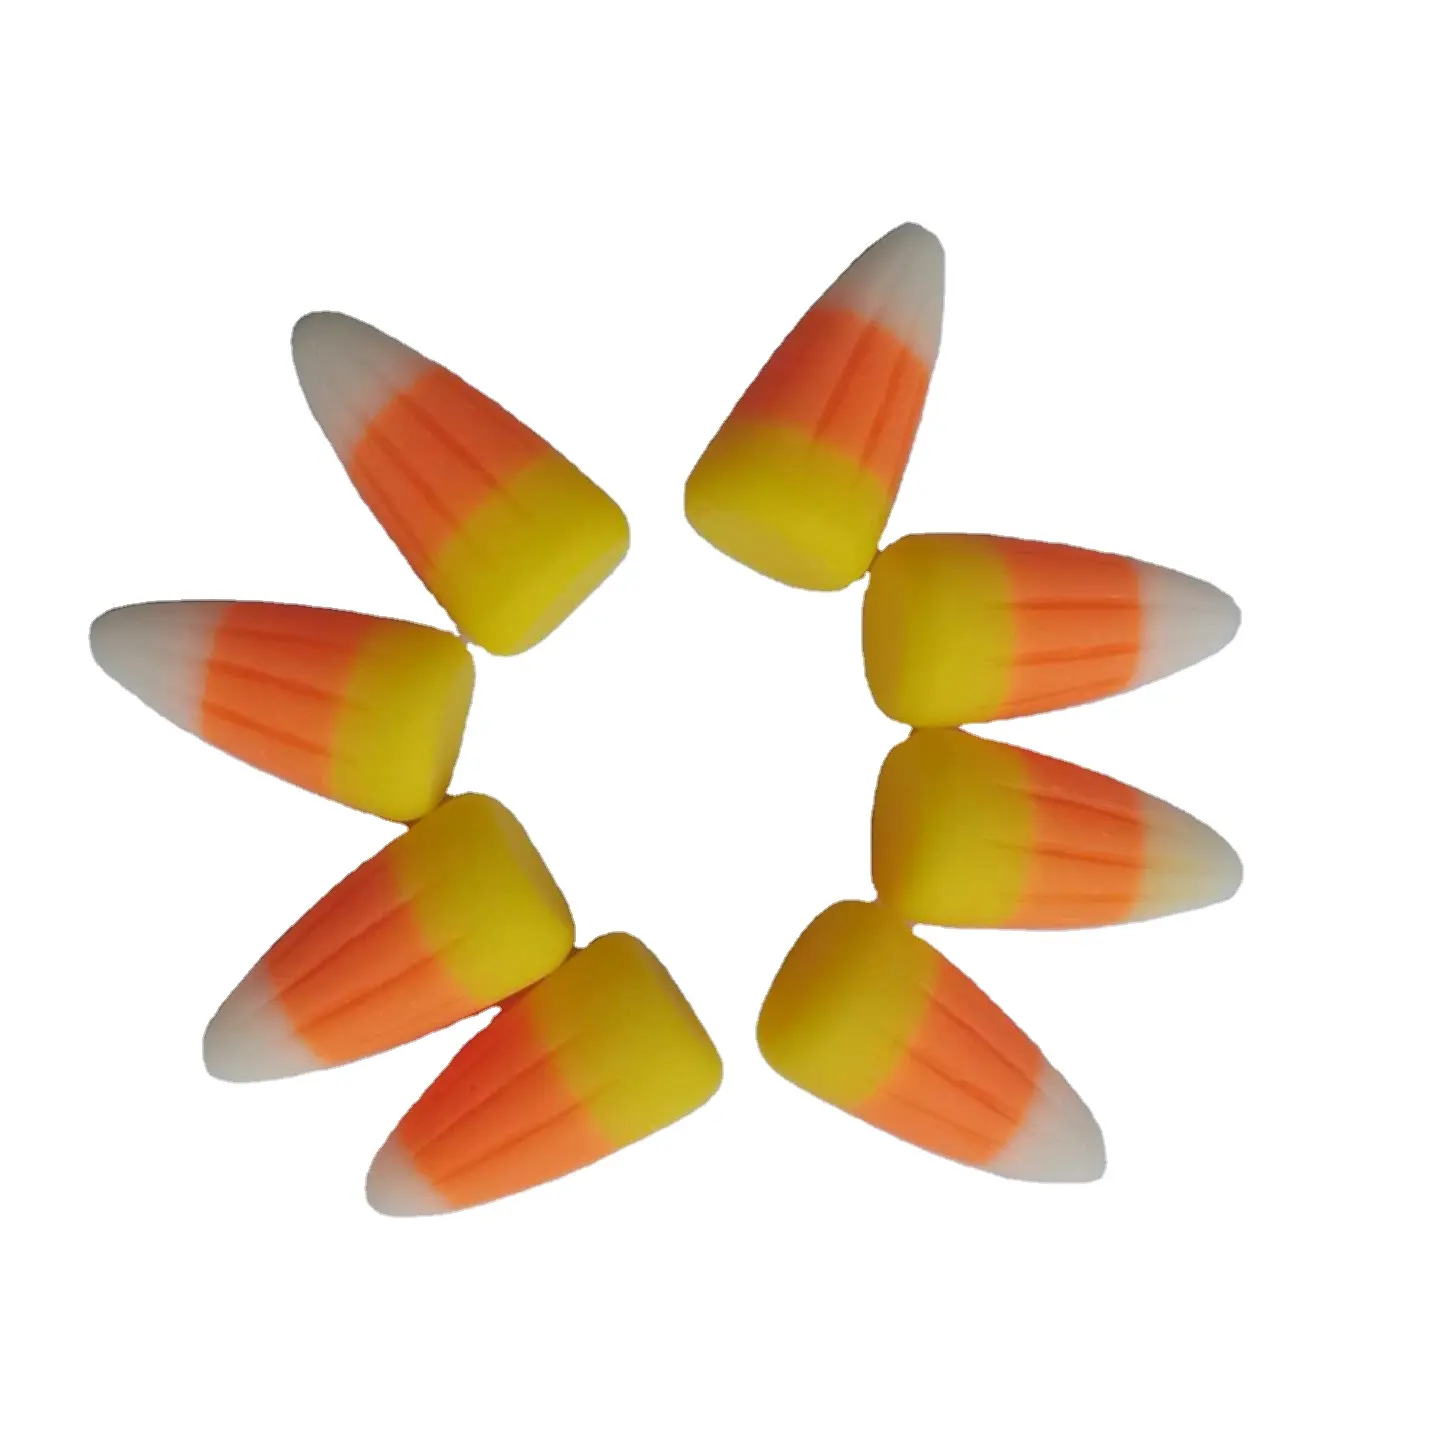 DIY CANDY CORN Flat Back Cabochons, Halloween Craft Charms 12*25MM Big Resin Candy Corn Ornaments Jewelry Creation